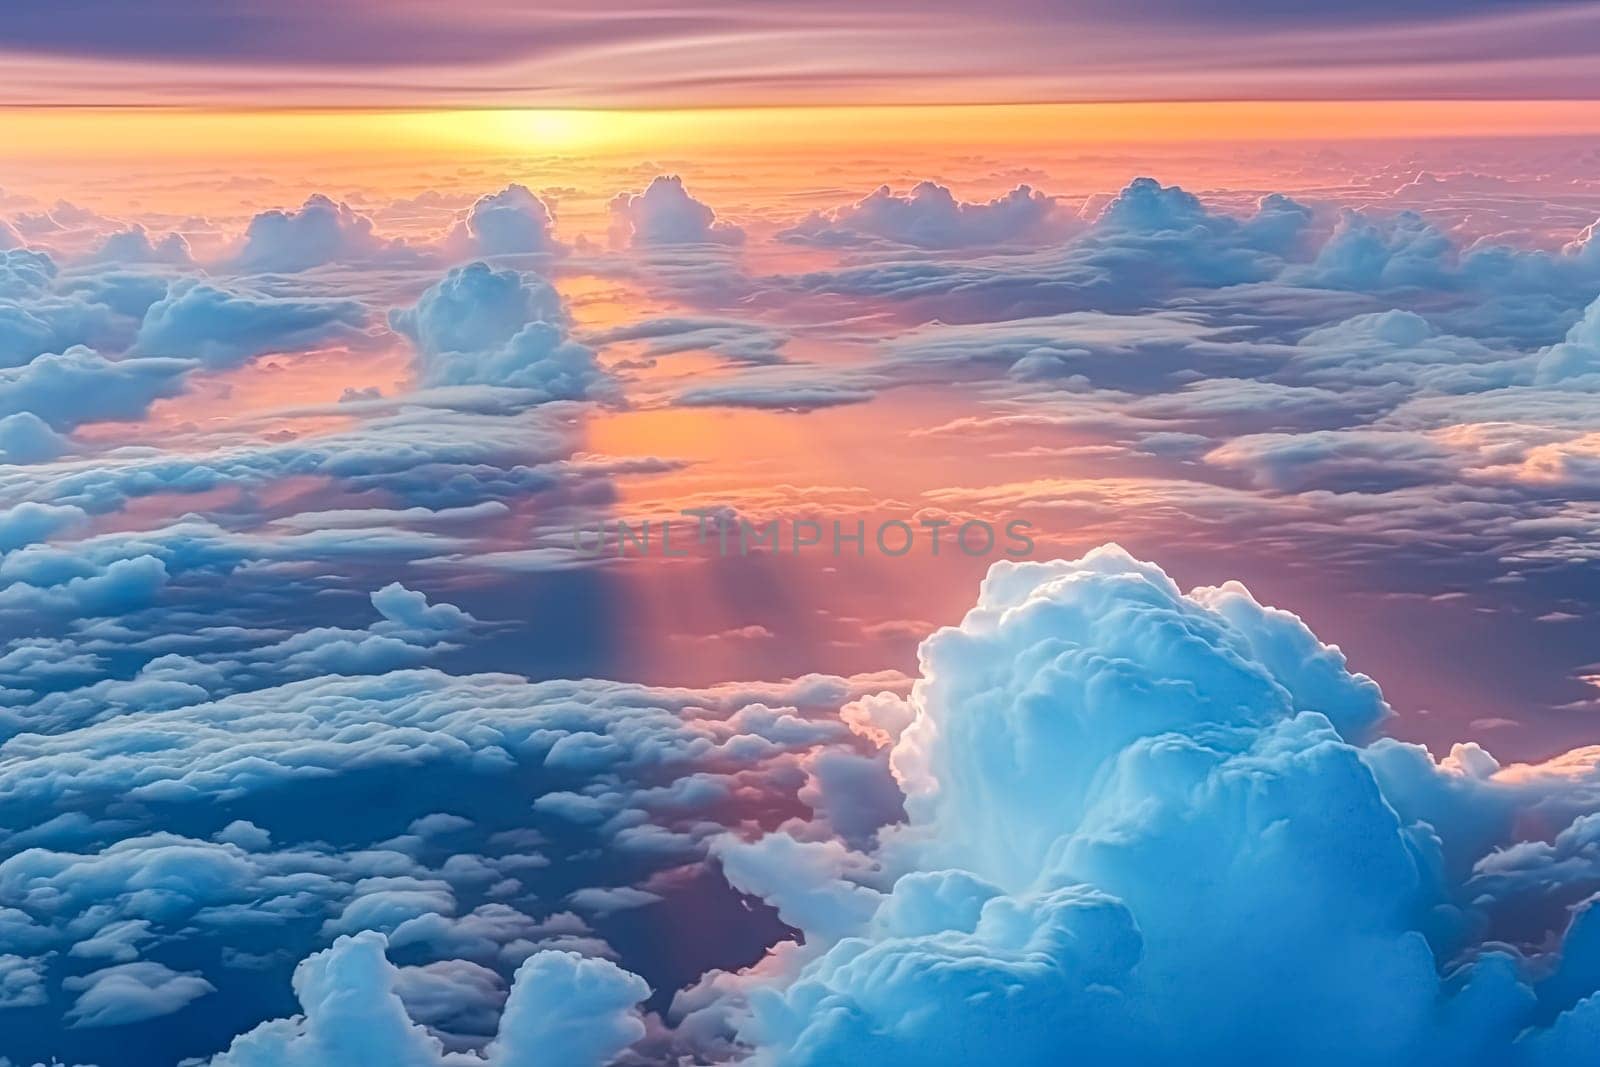 The sky is painted with an array of clouds as the sun begins its descent, casting warm hues across the horizon in a breathtaking sunset scene.